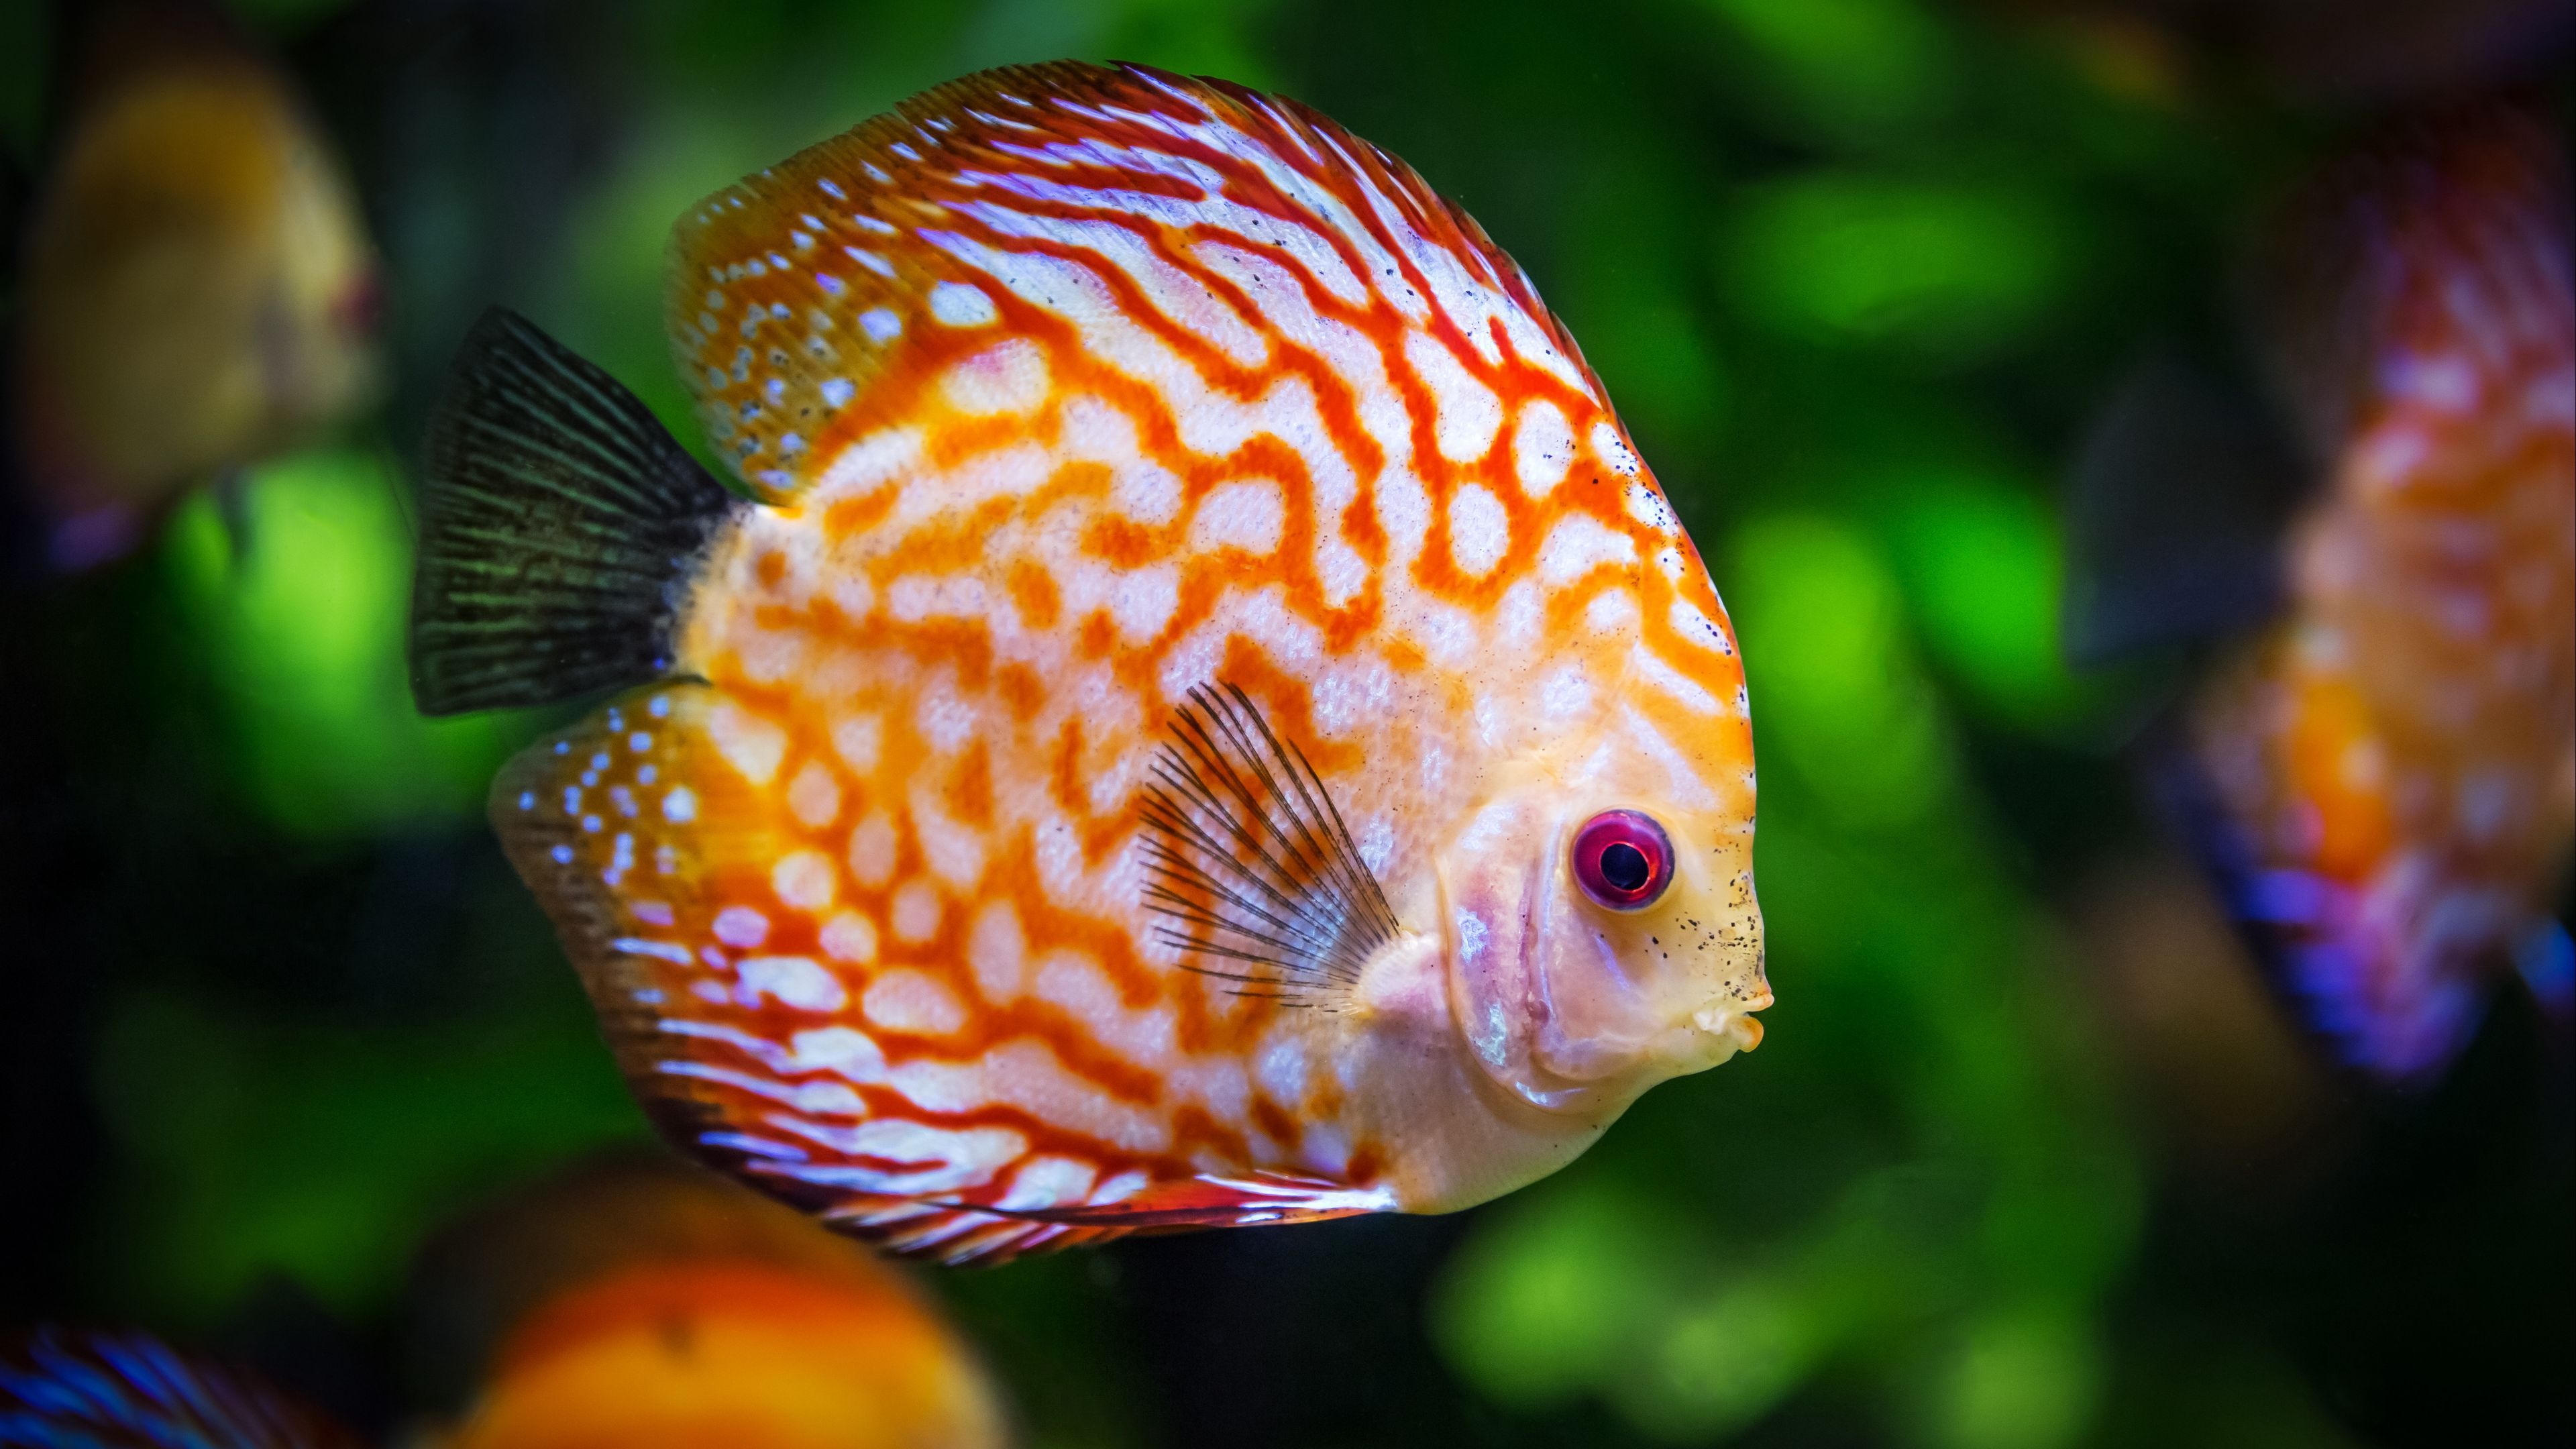 Download wallpaper 3840x2160 discus, fish, color 4k uhd 16:9 HD background